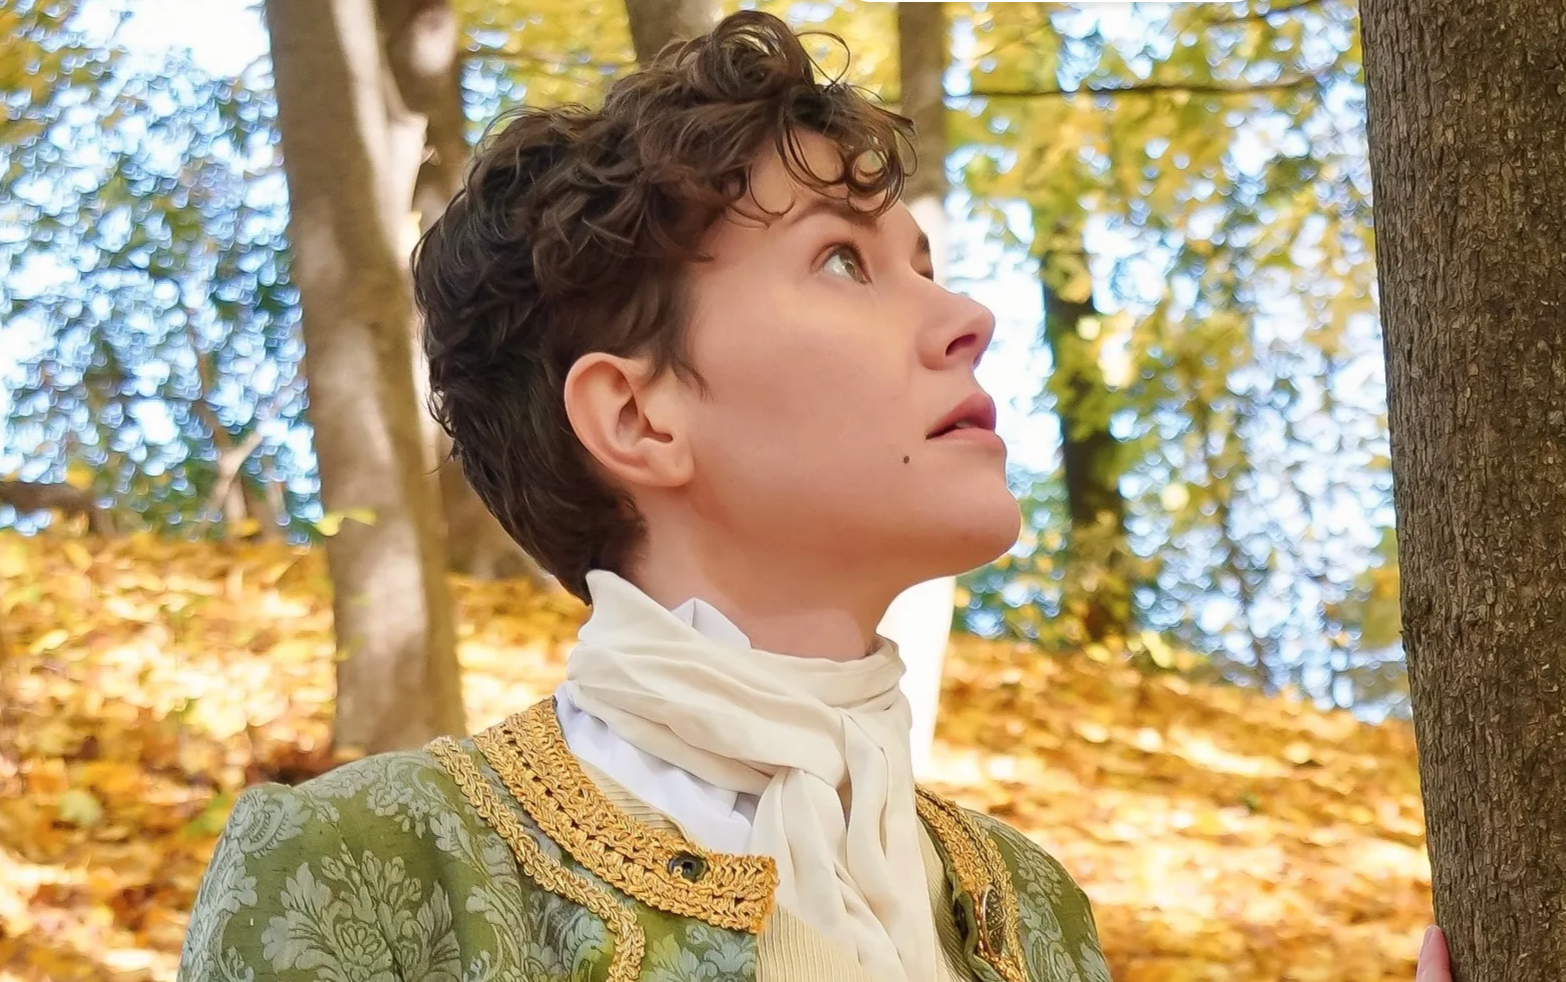 A white genderqueer person with short brown hair looks up to the right. They are wearing fancy 18th century menswear, standing in front of a background of autumn leaves and trees.